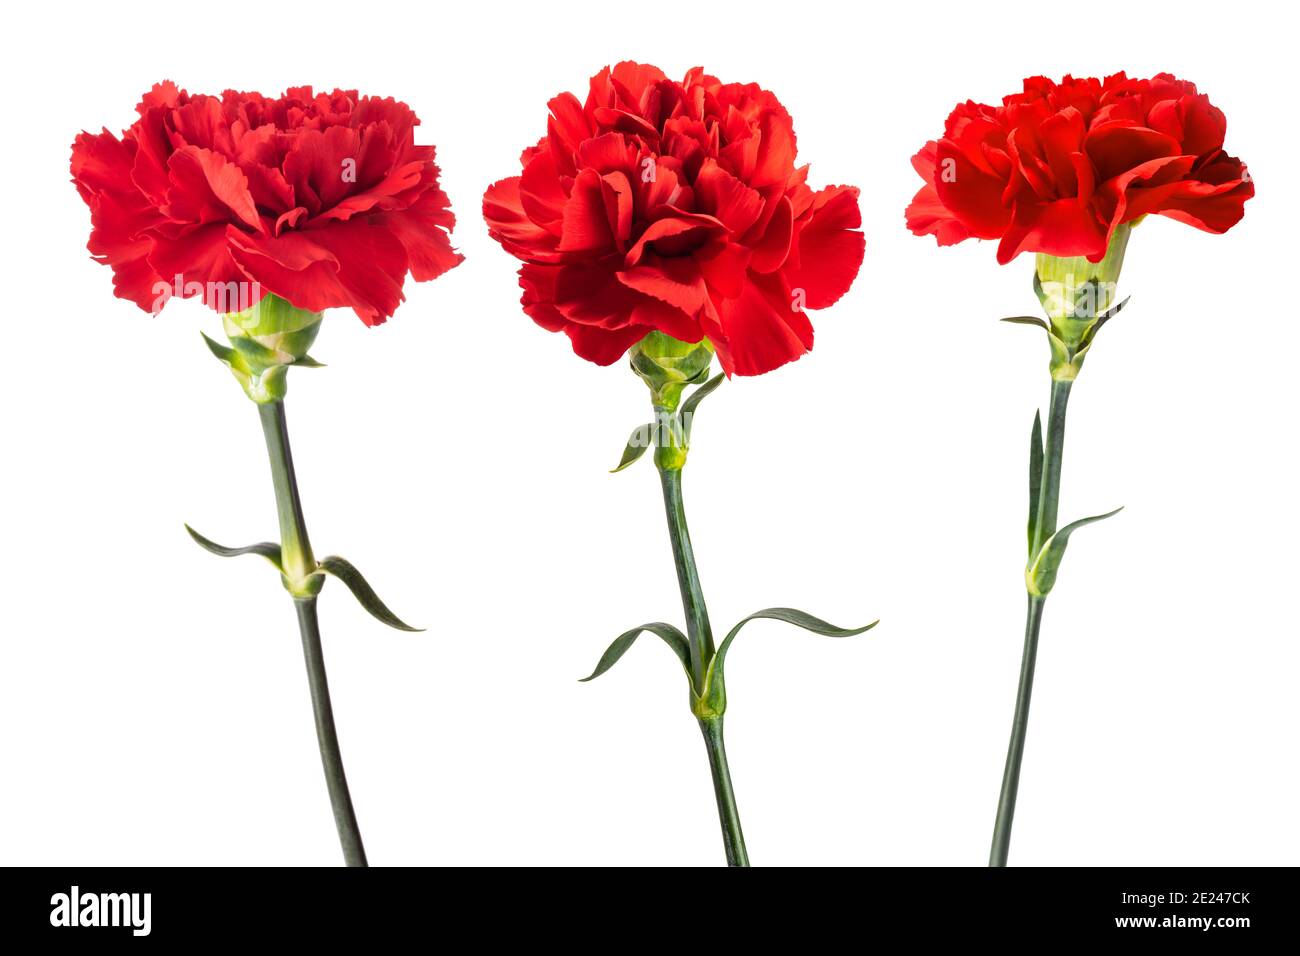 Red carnations flowers isolated on white background Stock Photo - Alamy